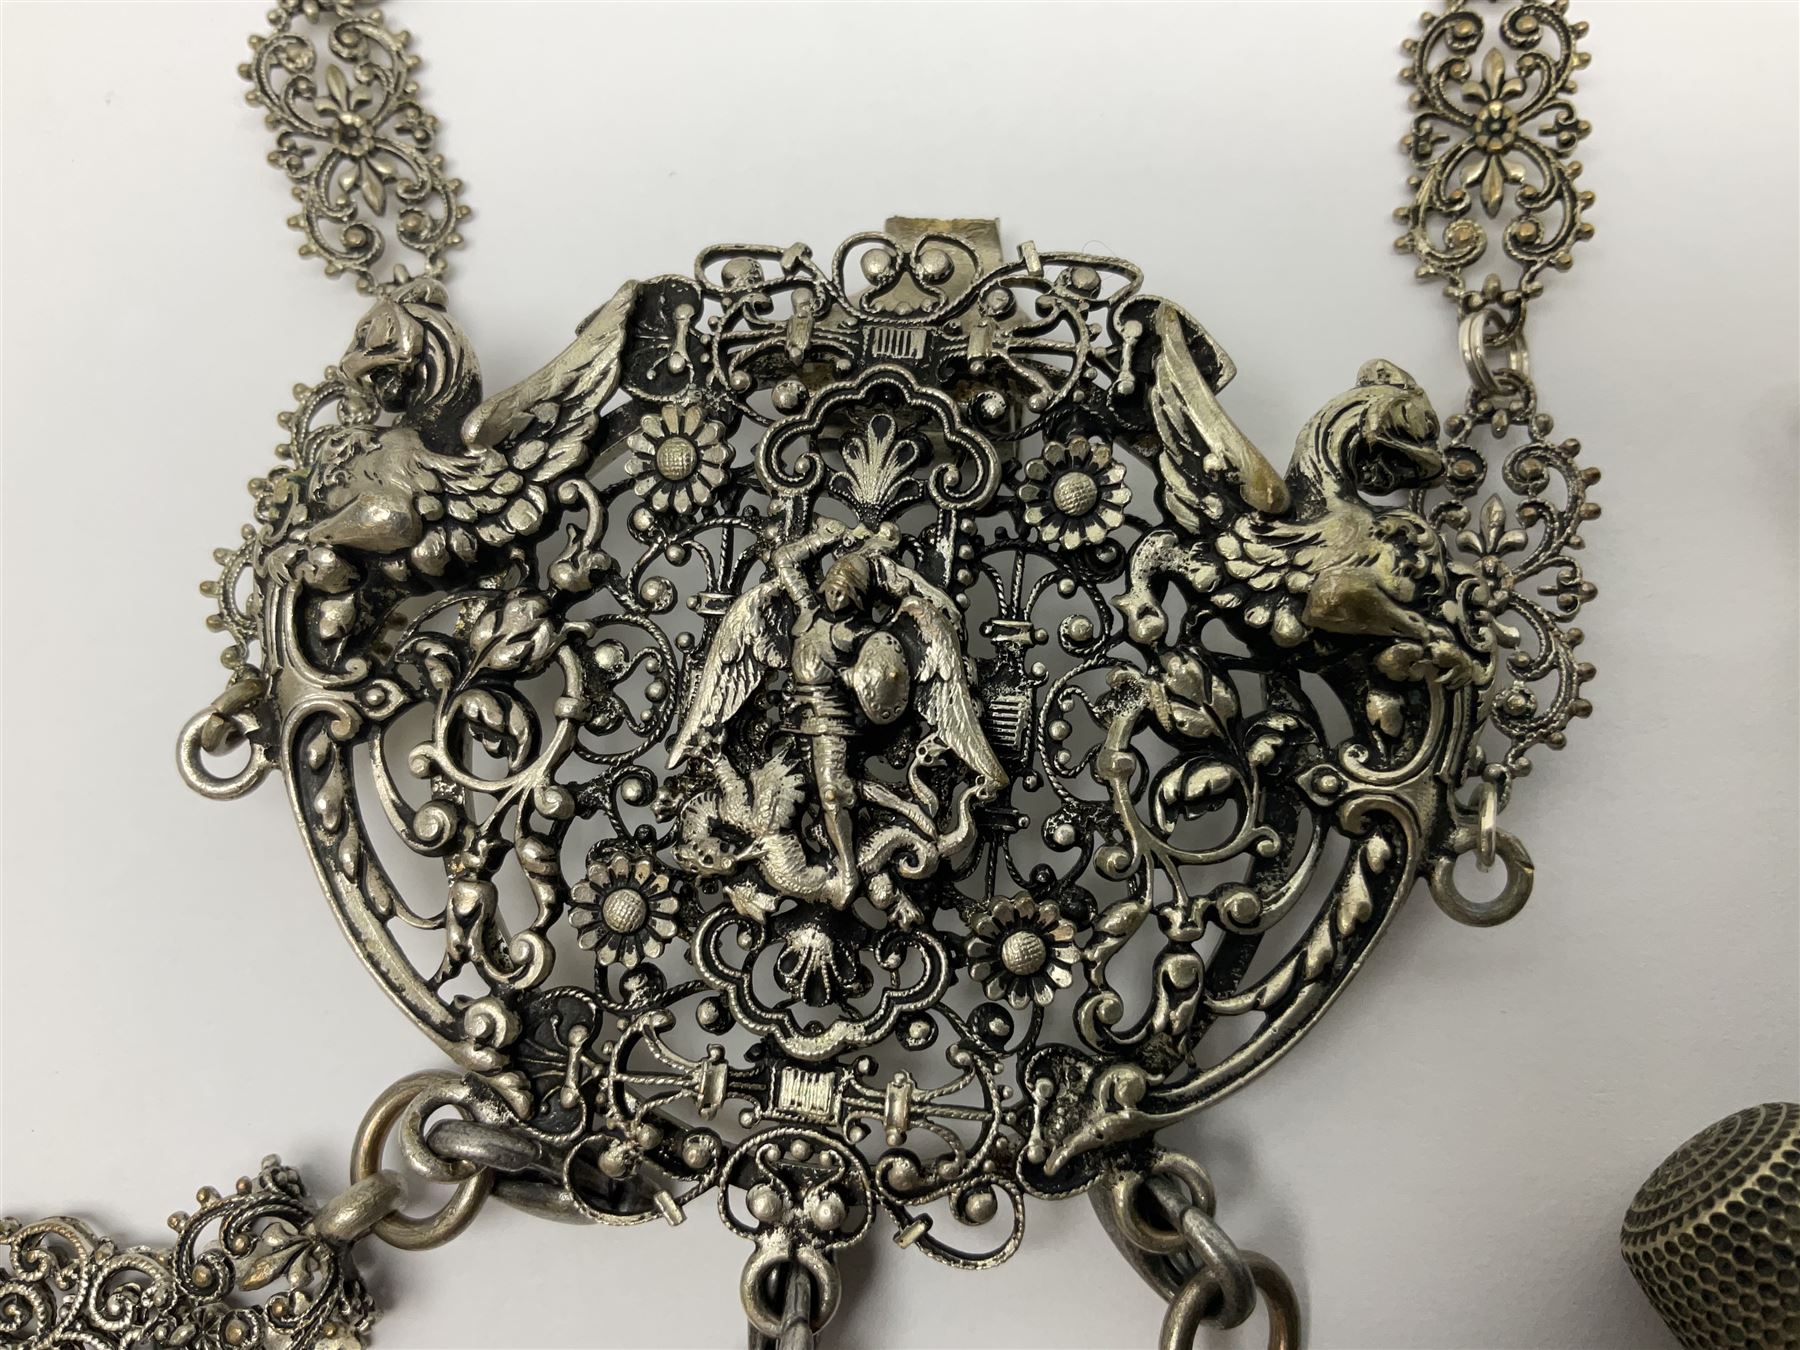 19th century continental silver plated chatelaine - Image 2 of 15